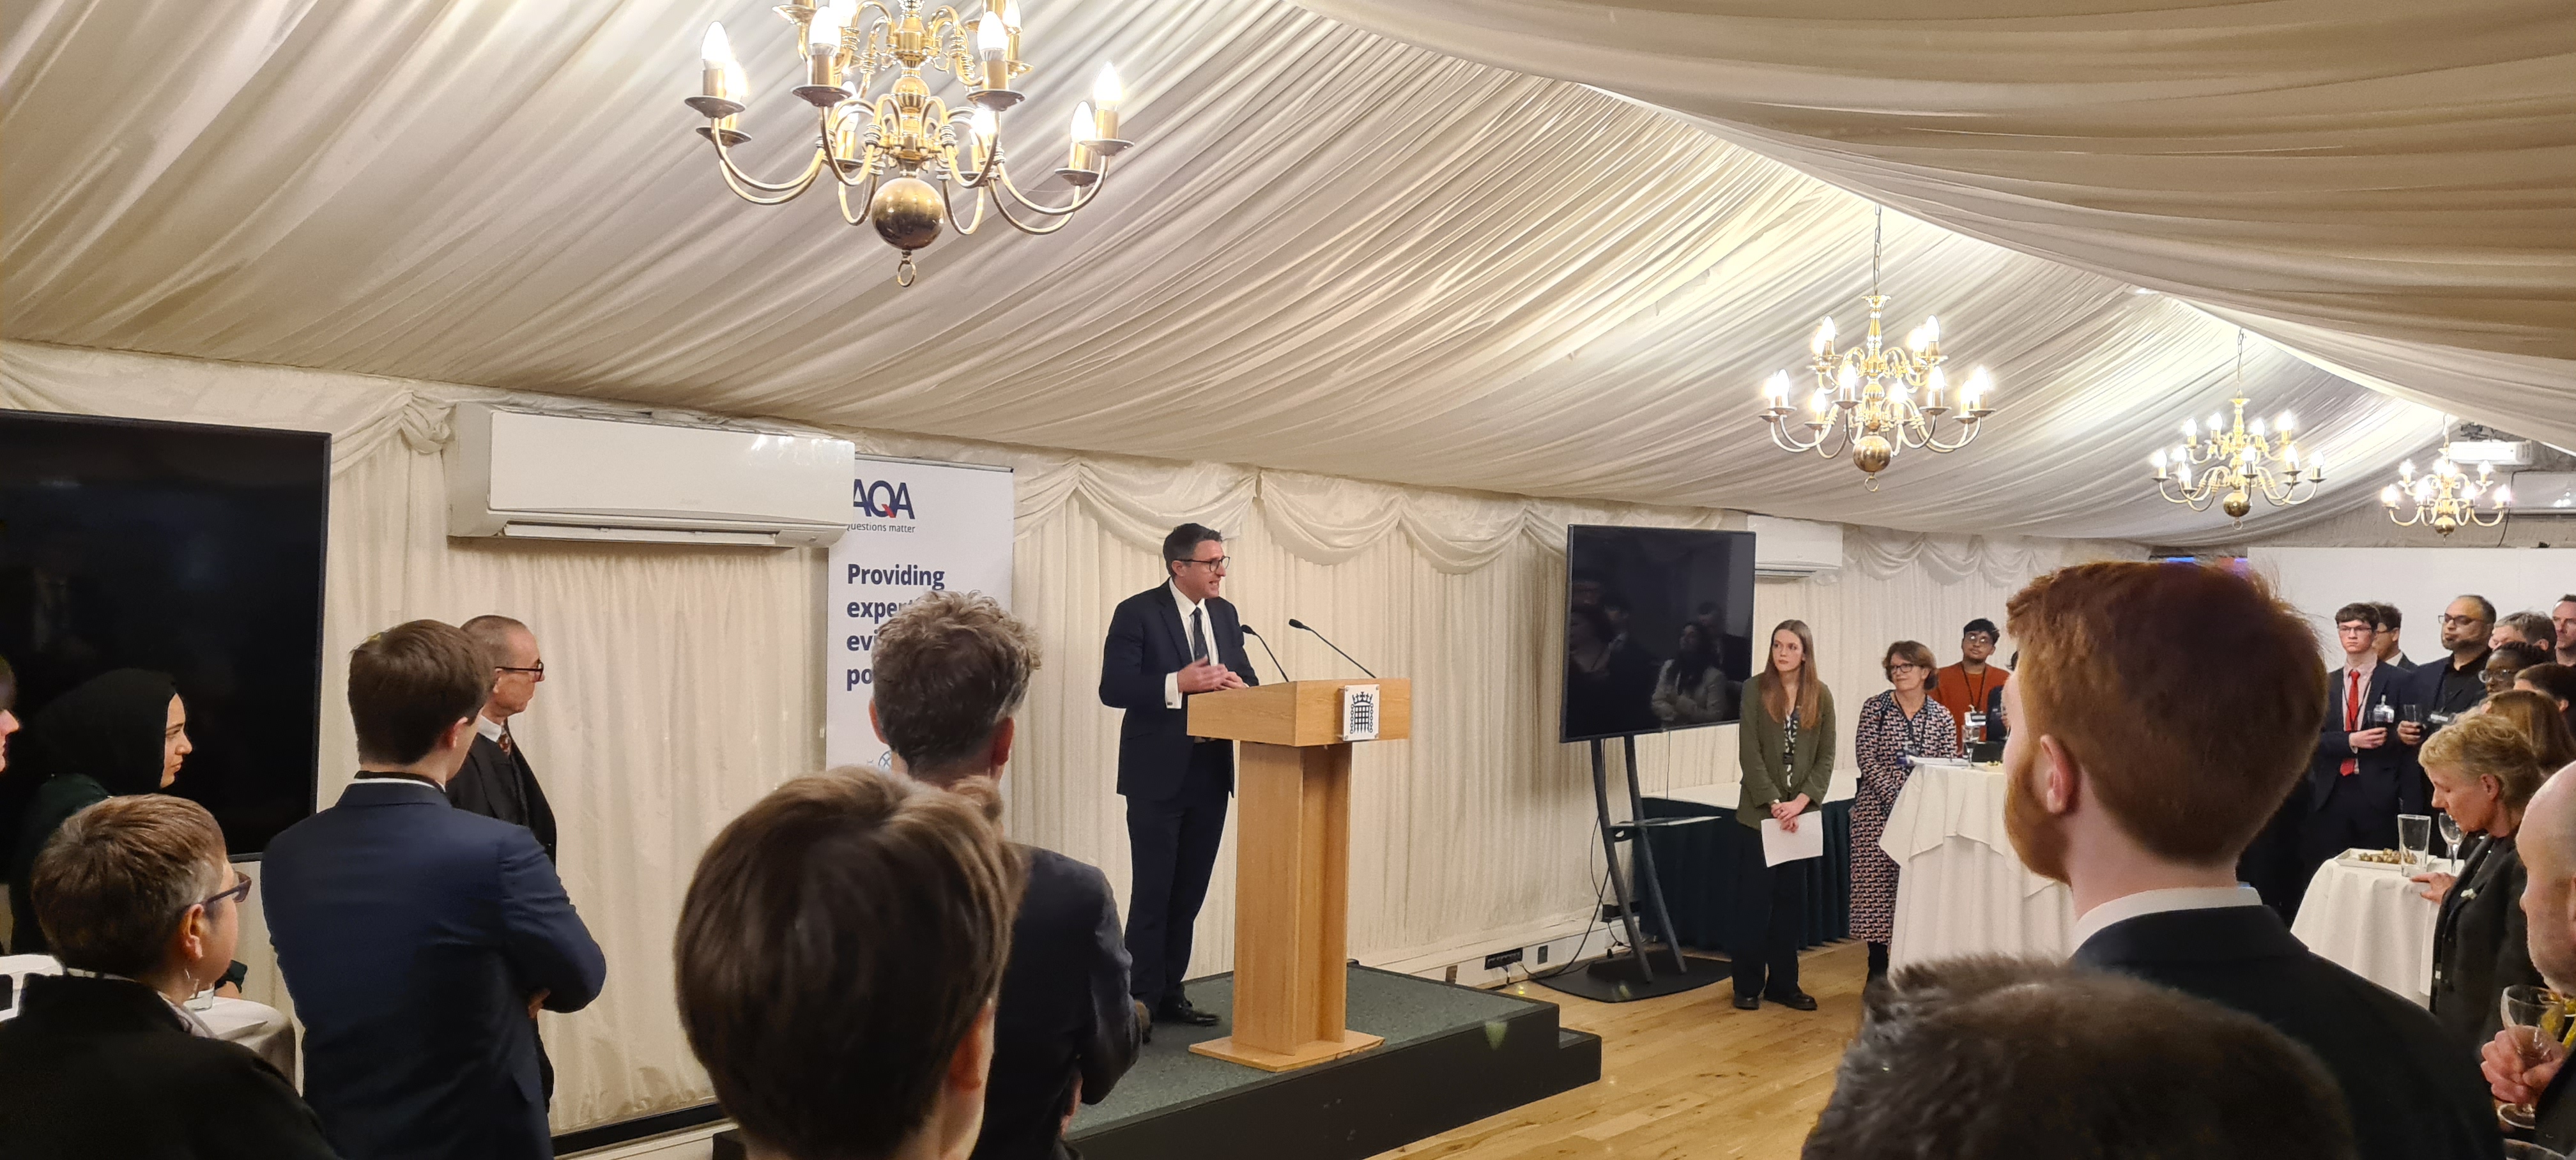 Event sponsor Ben Everitt MP addressing guests and opening the evening.